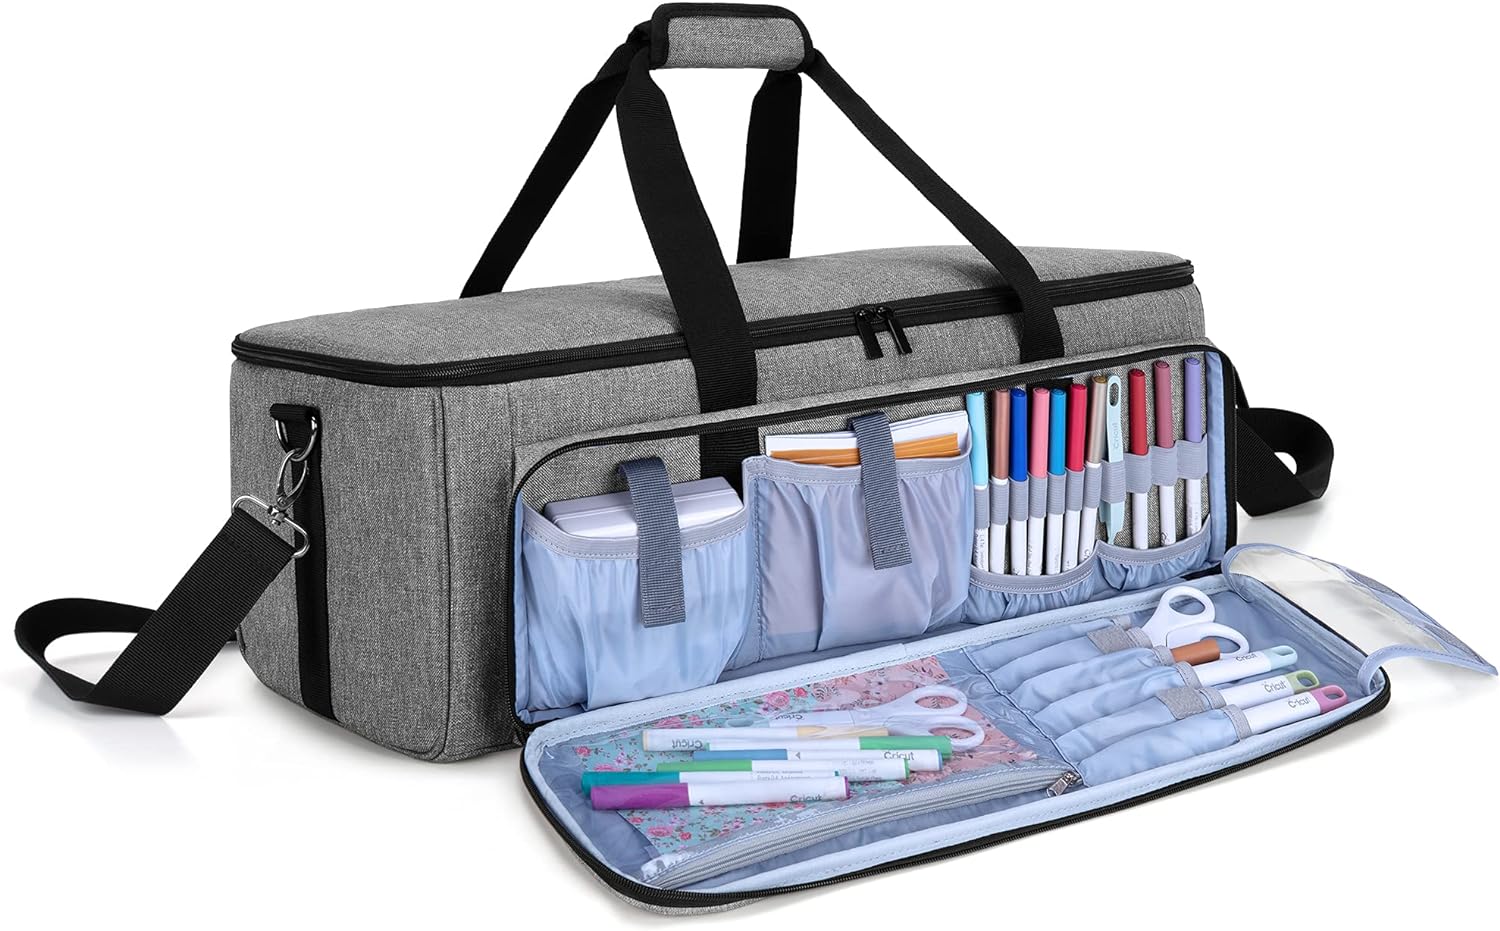 LUXJA Carrying Case Compatible with Cricut Maker (Explore Air, Air 2), Storage Bag Compatible with Cricut Die-Cut Machine and Accessories (Bag Only), Gray